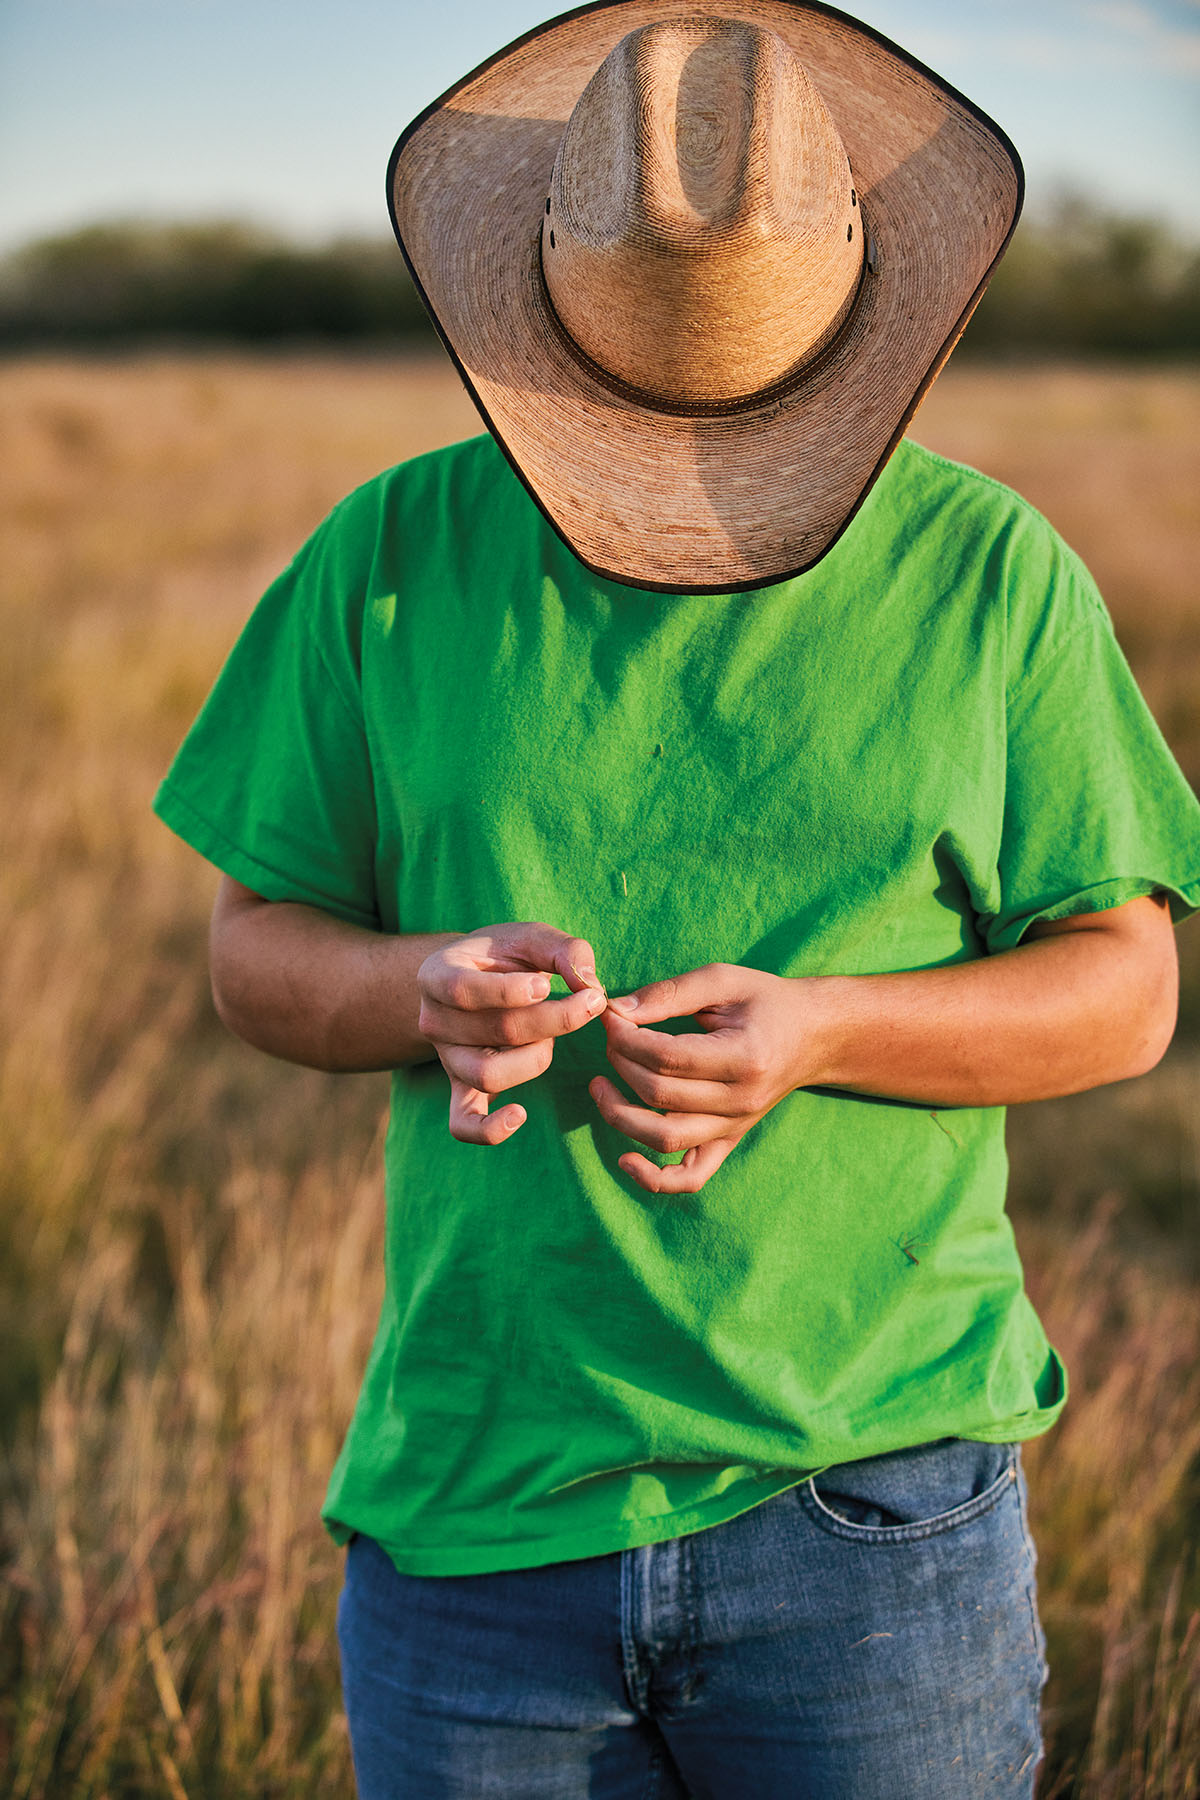 A young person in a green shirt and cowboy hat poses with his head down in a grassy field